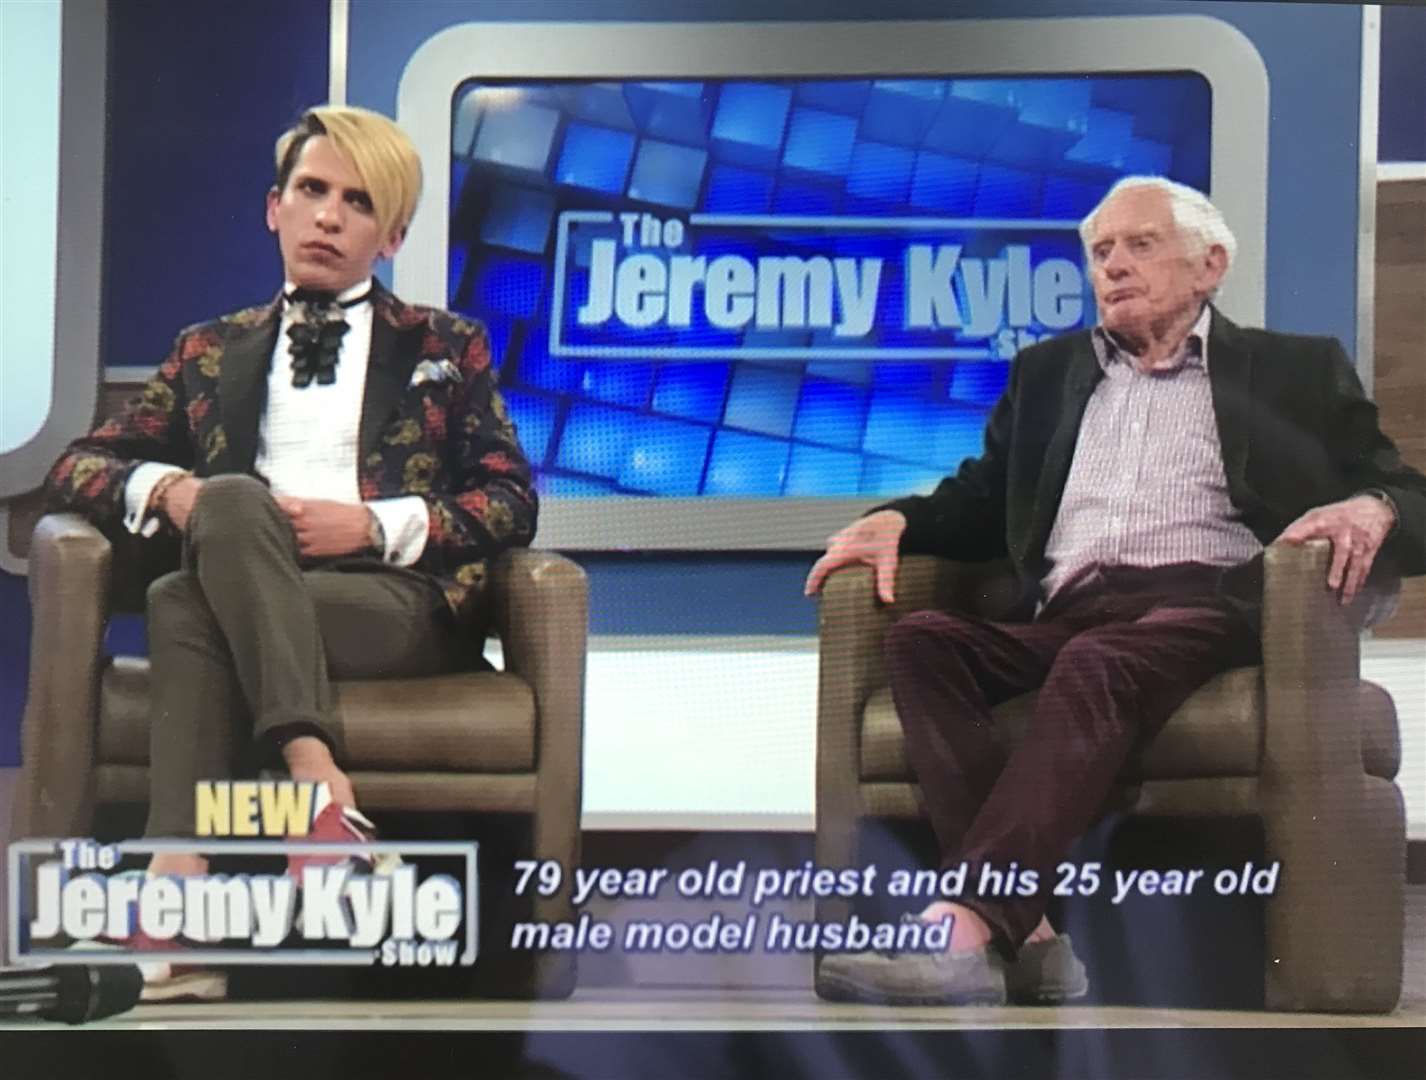 Philip Clements and Florin Marin appeared on The Jeremy Kyle Show in 2018. Picture: ITV